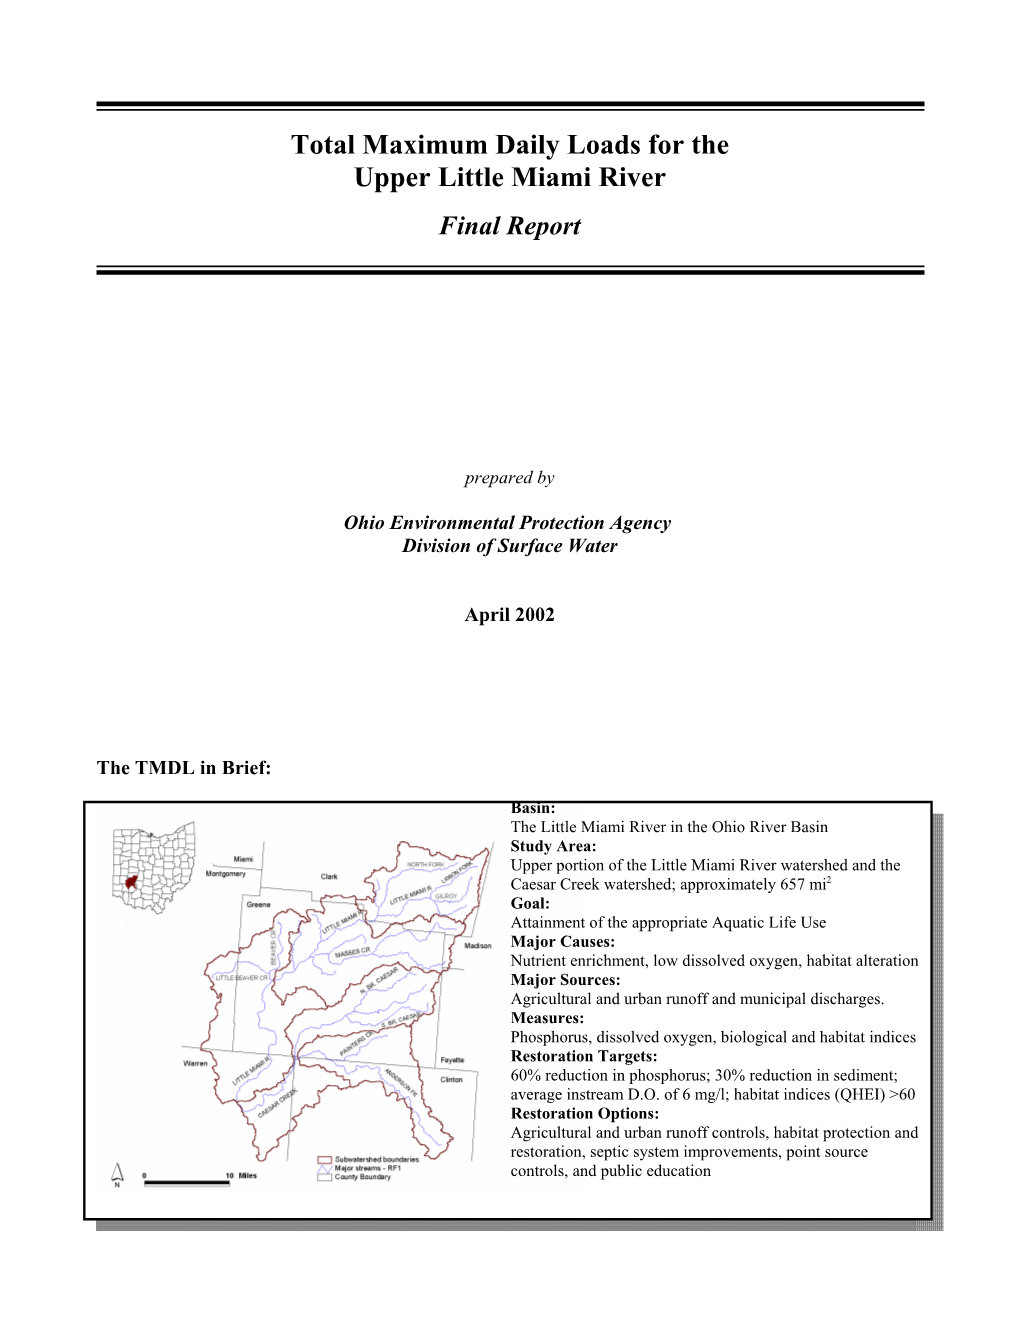 Total Maximum Daily Loads for the Upper Little Miami River Final Report